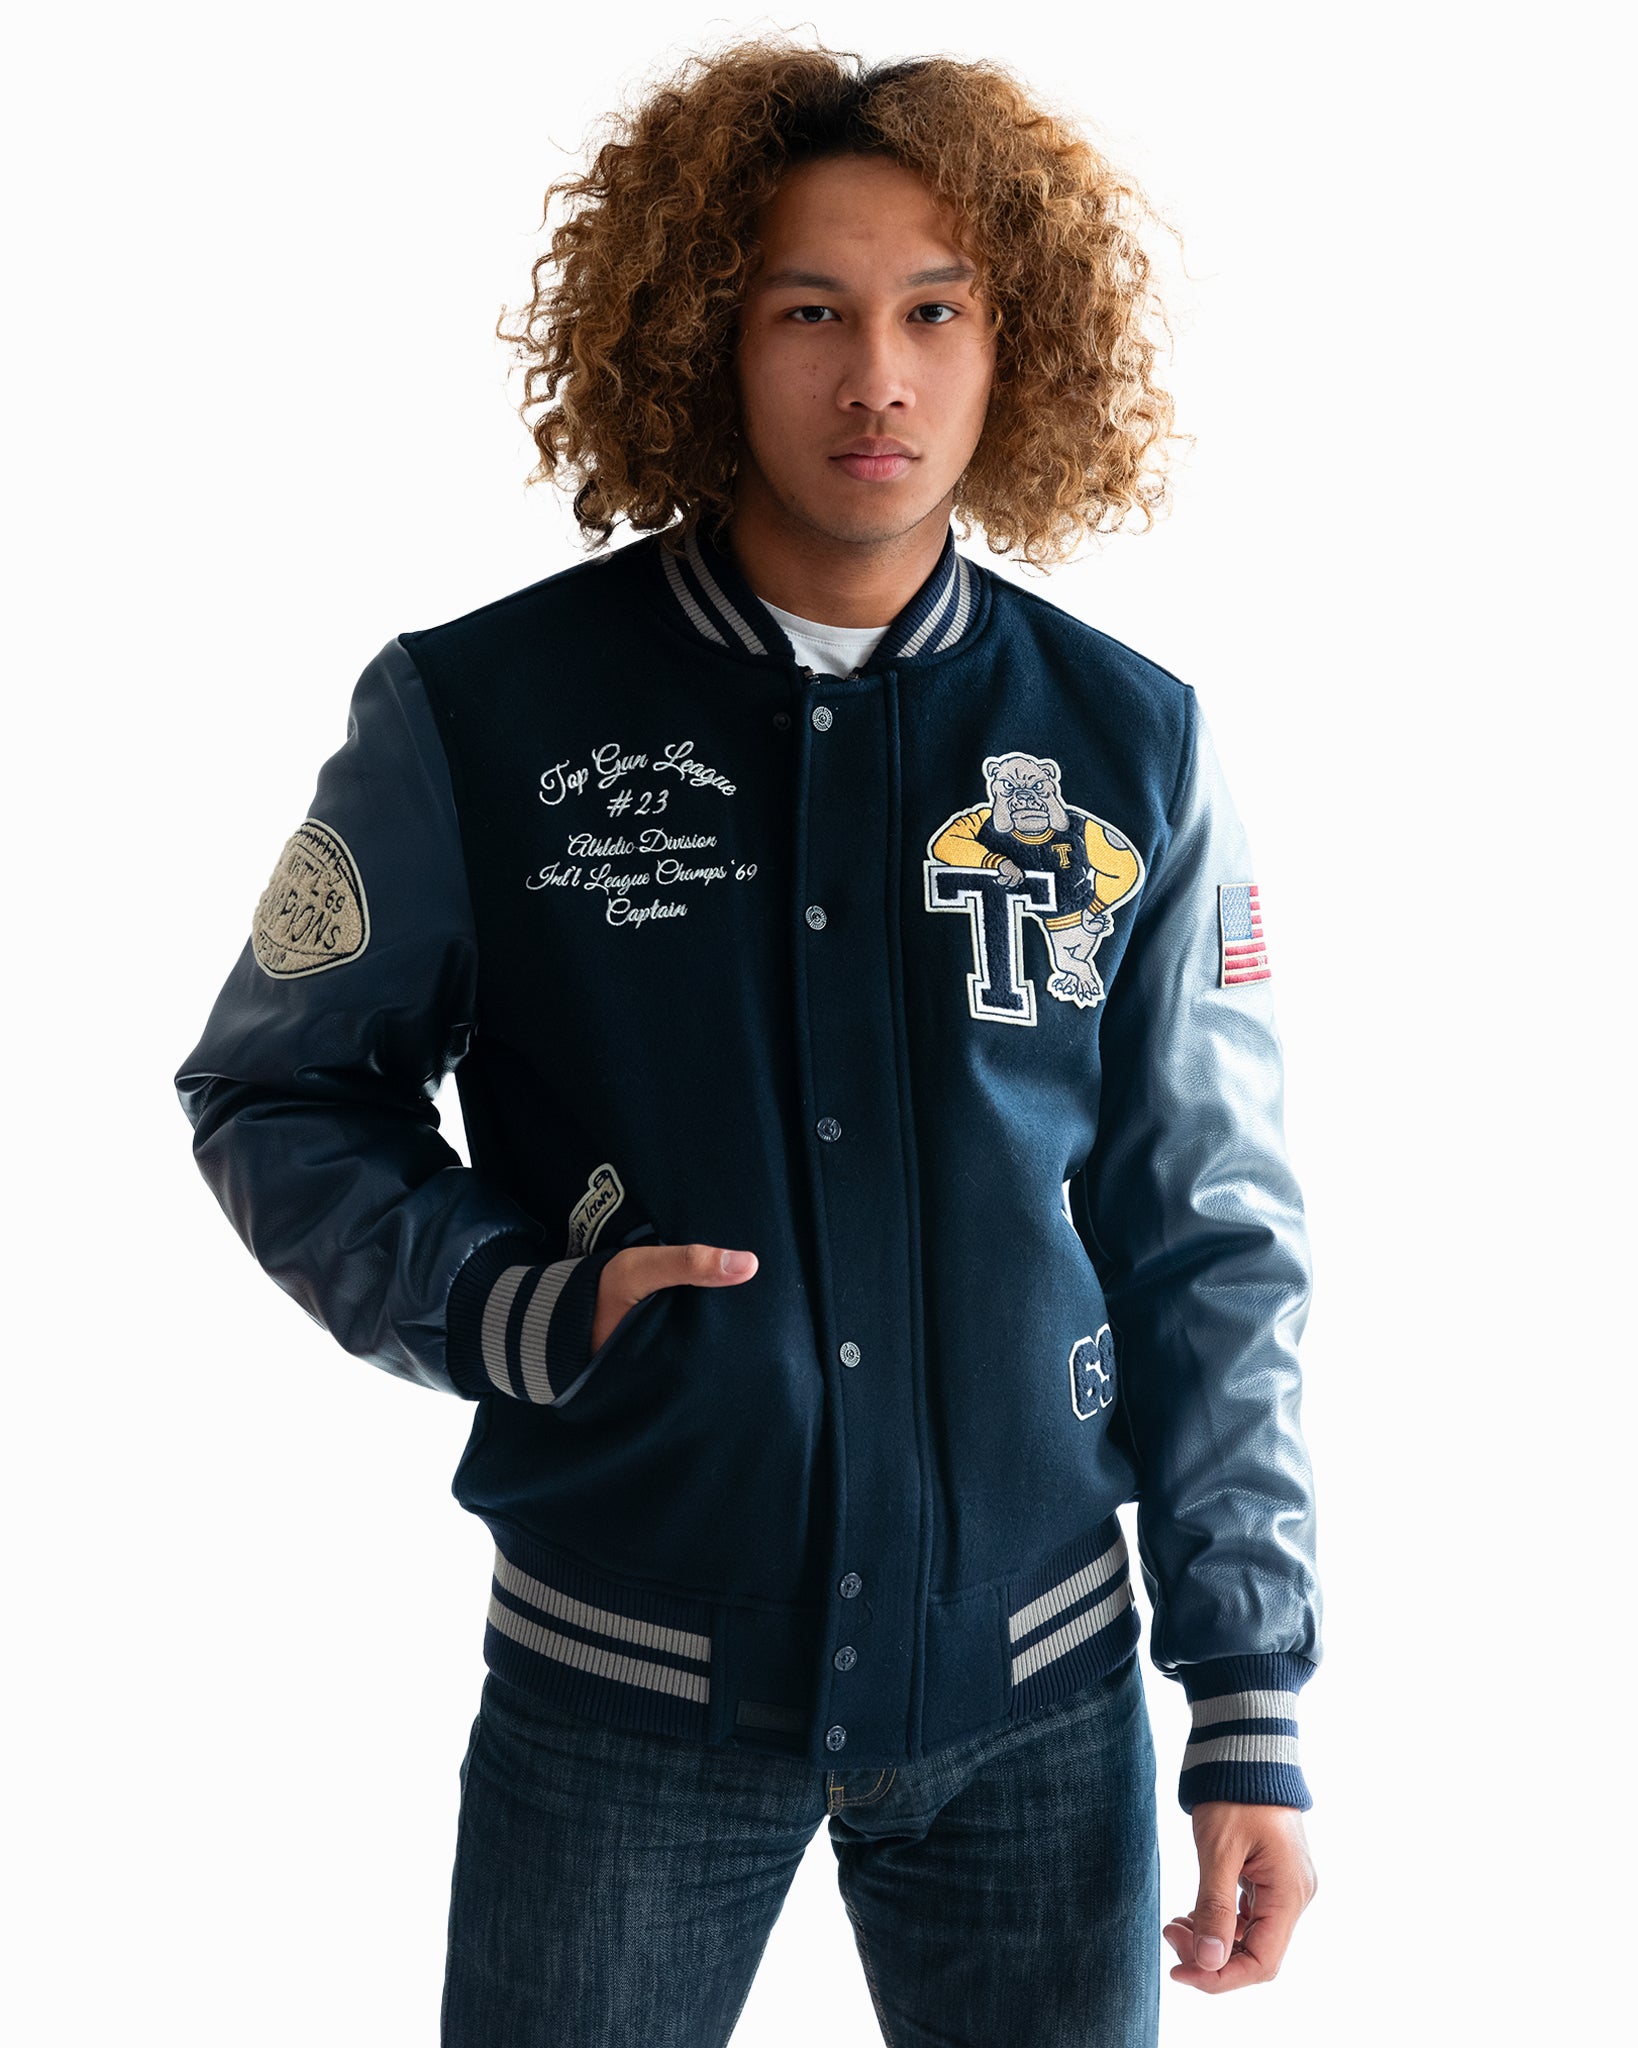 Winter Varsity Jacket With Letter Badge Street Fashion For Men And Women,  Hip Hop Style With Blue/Red Colors From Pong01, $41.49 | DHgate.Com